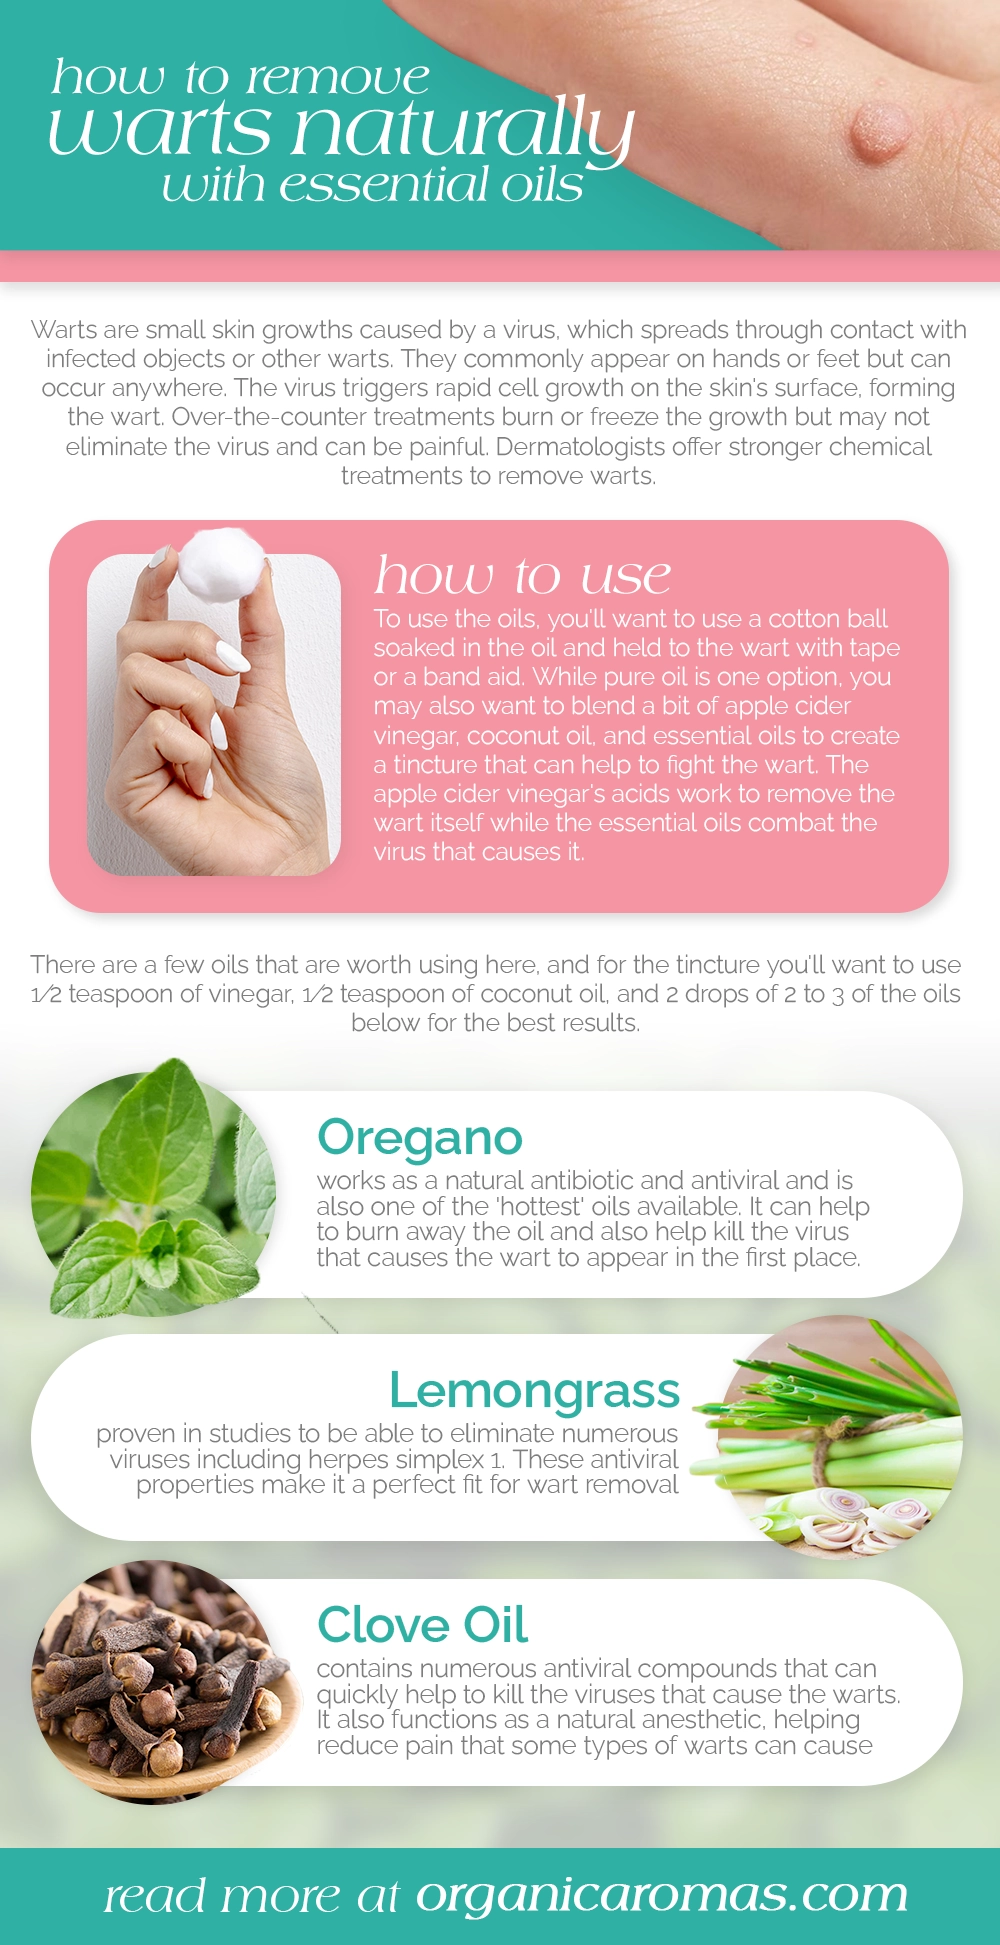 How to Remove Warts Naturally With Essential Oils pic